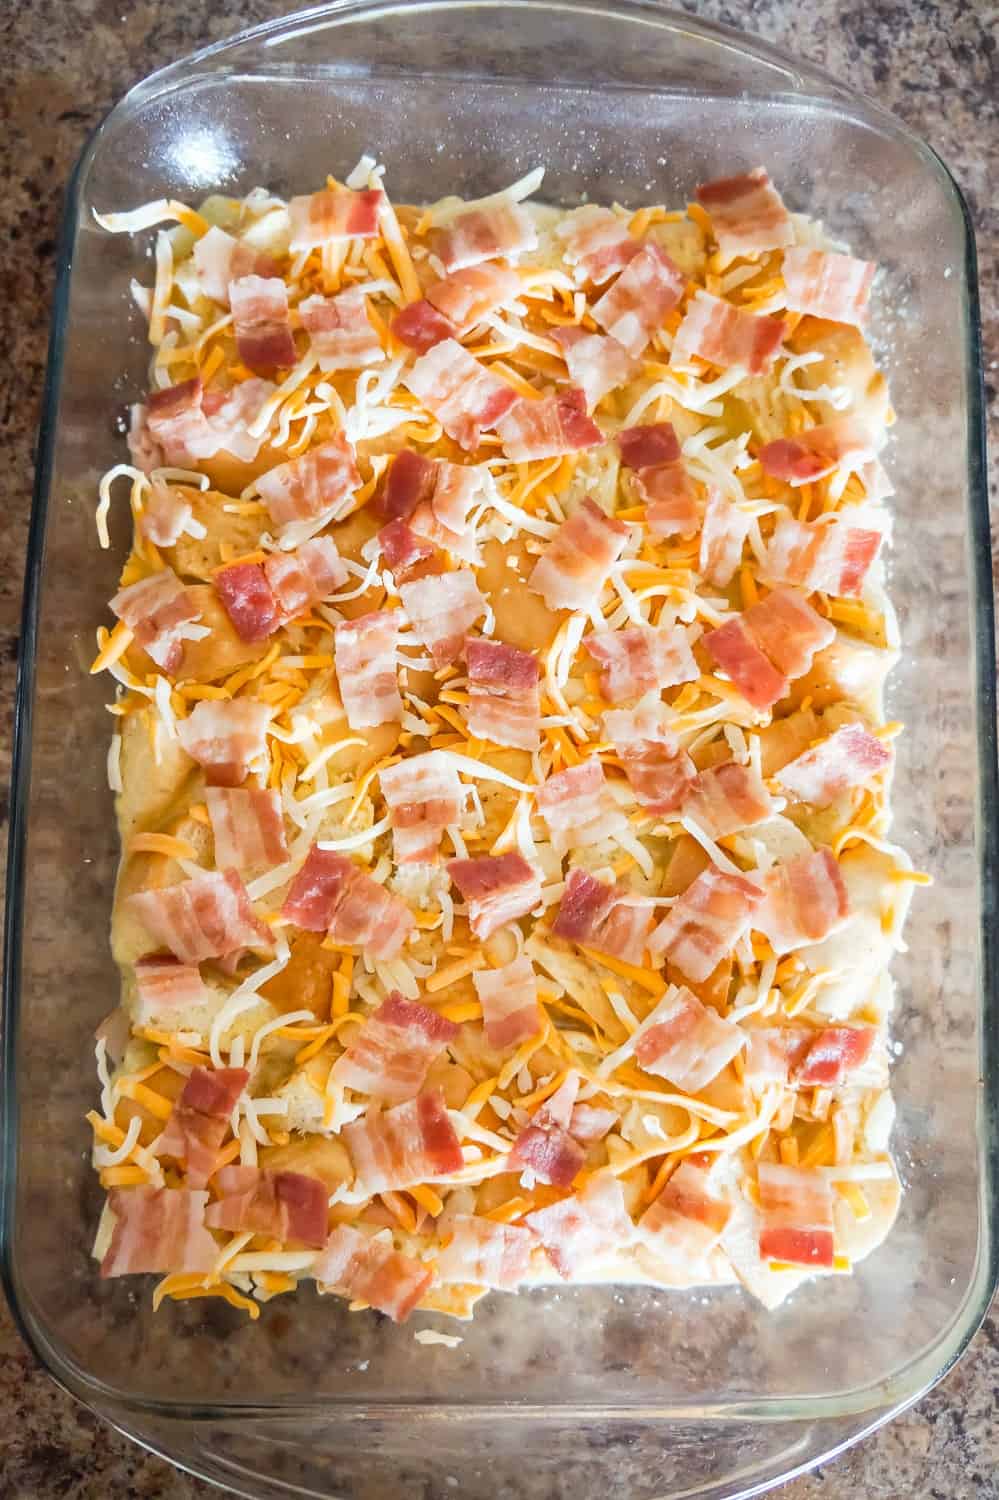 chopped bacon and shredded cheese on top of breakfast casserole before baking